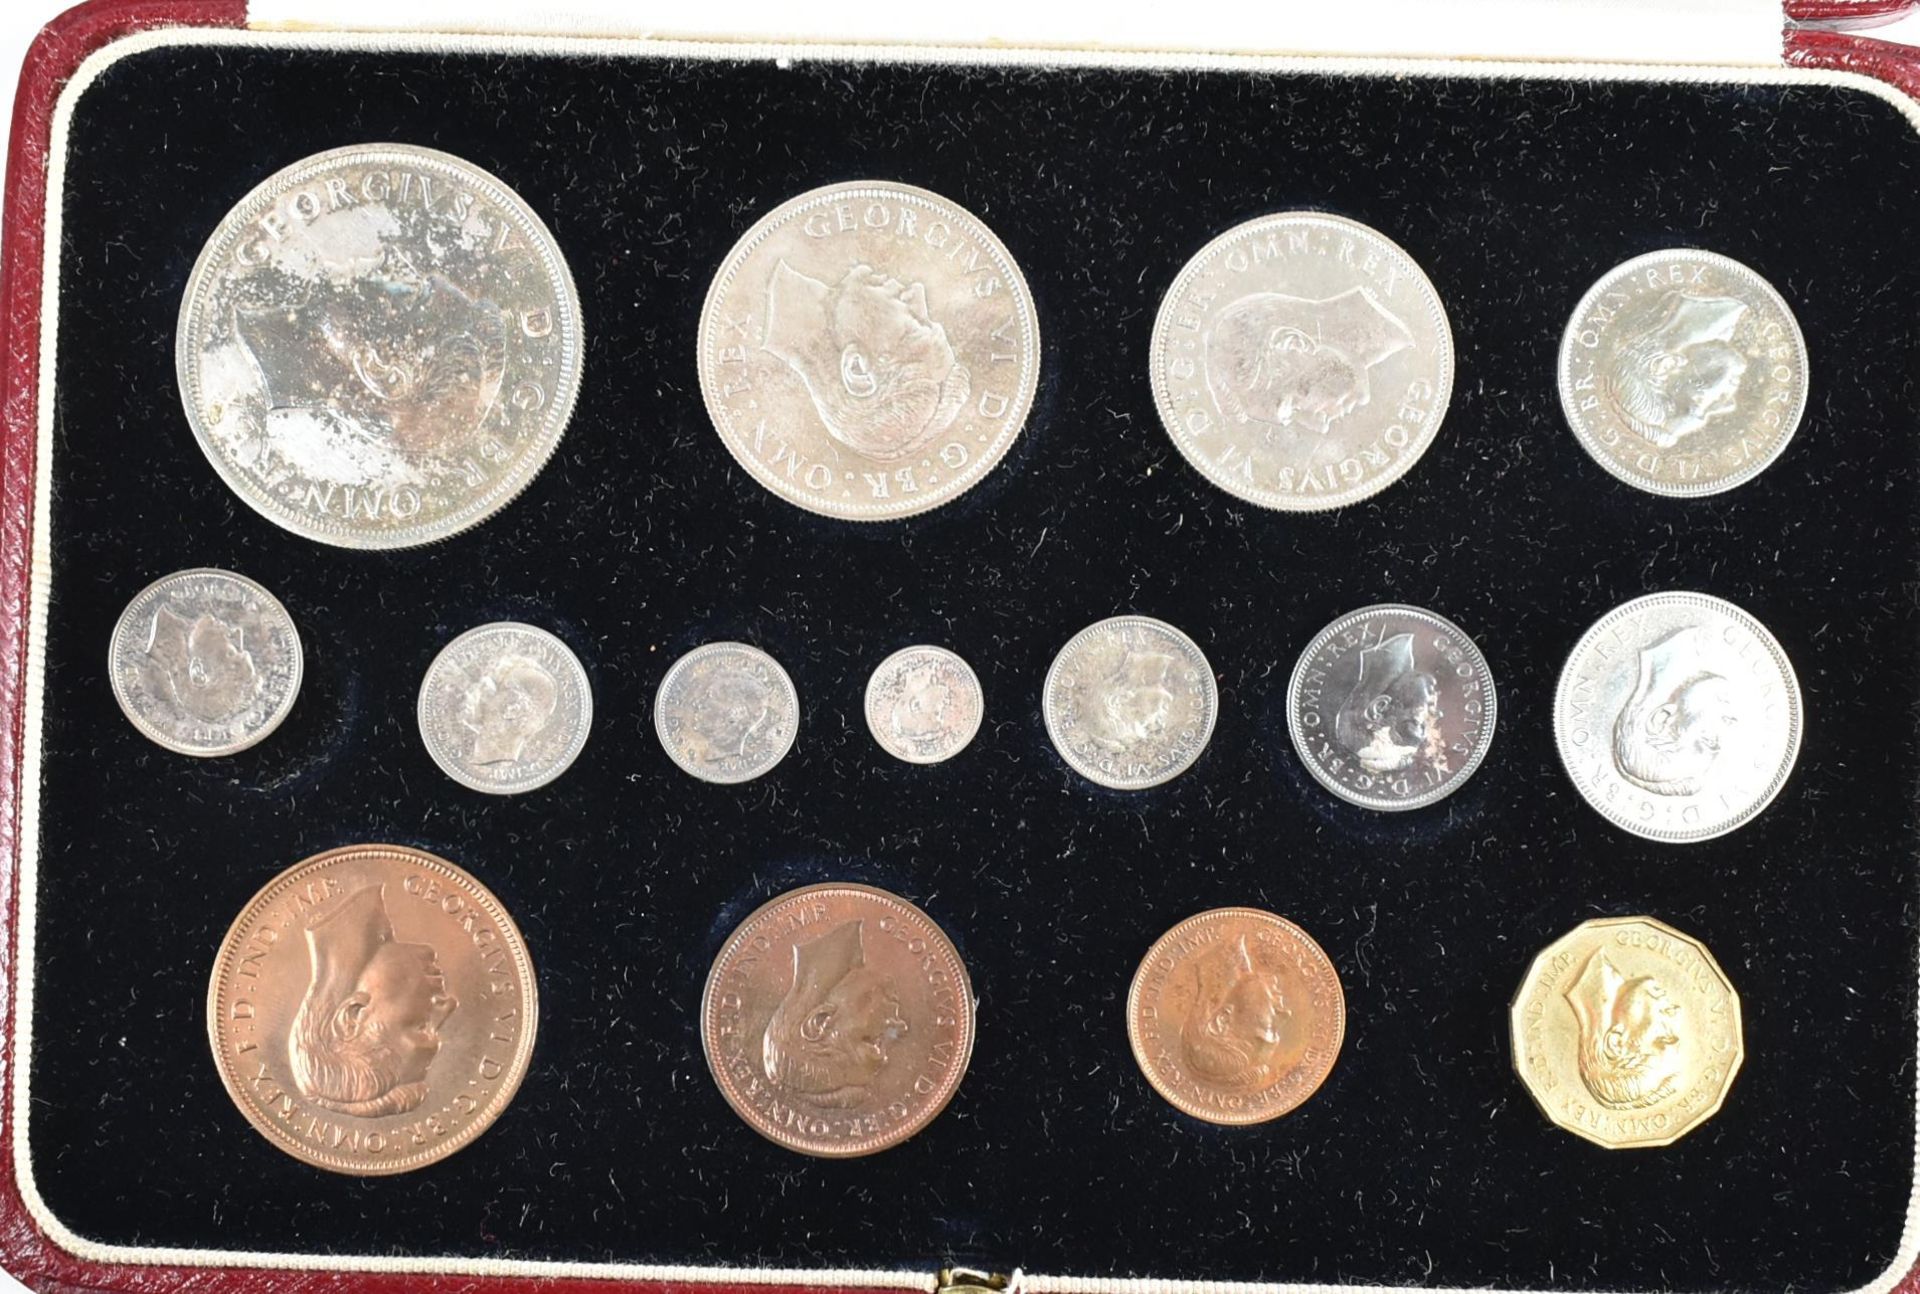 1937 - 15 COIN PROOF SPECIMEN COINS SET IN LEATHER CASE - Image 3 of 4